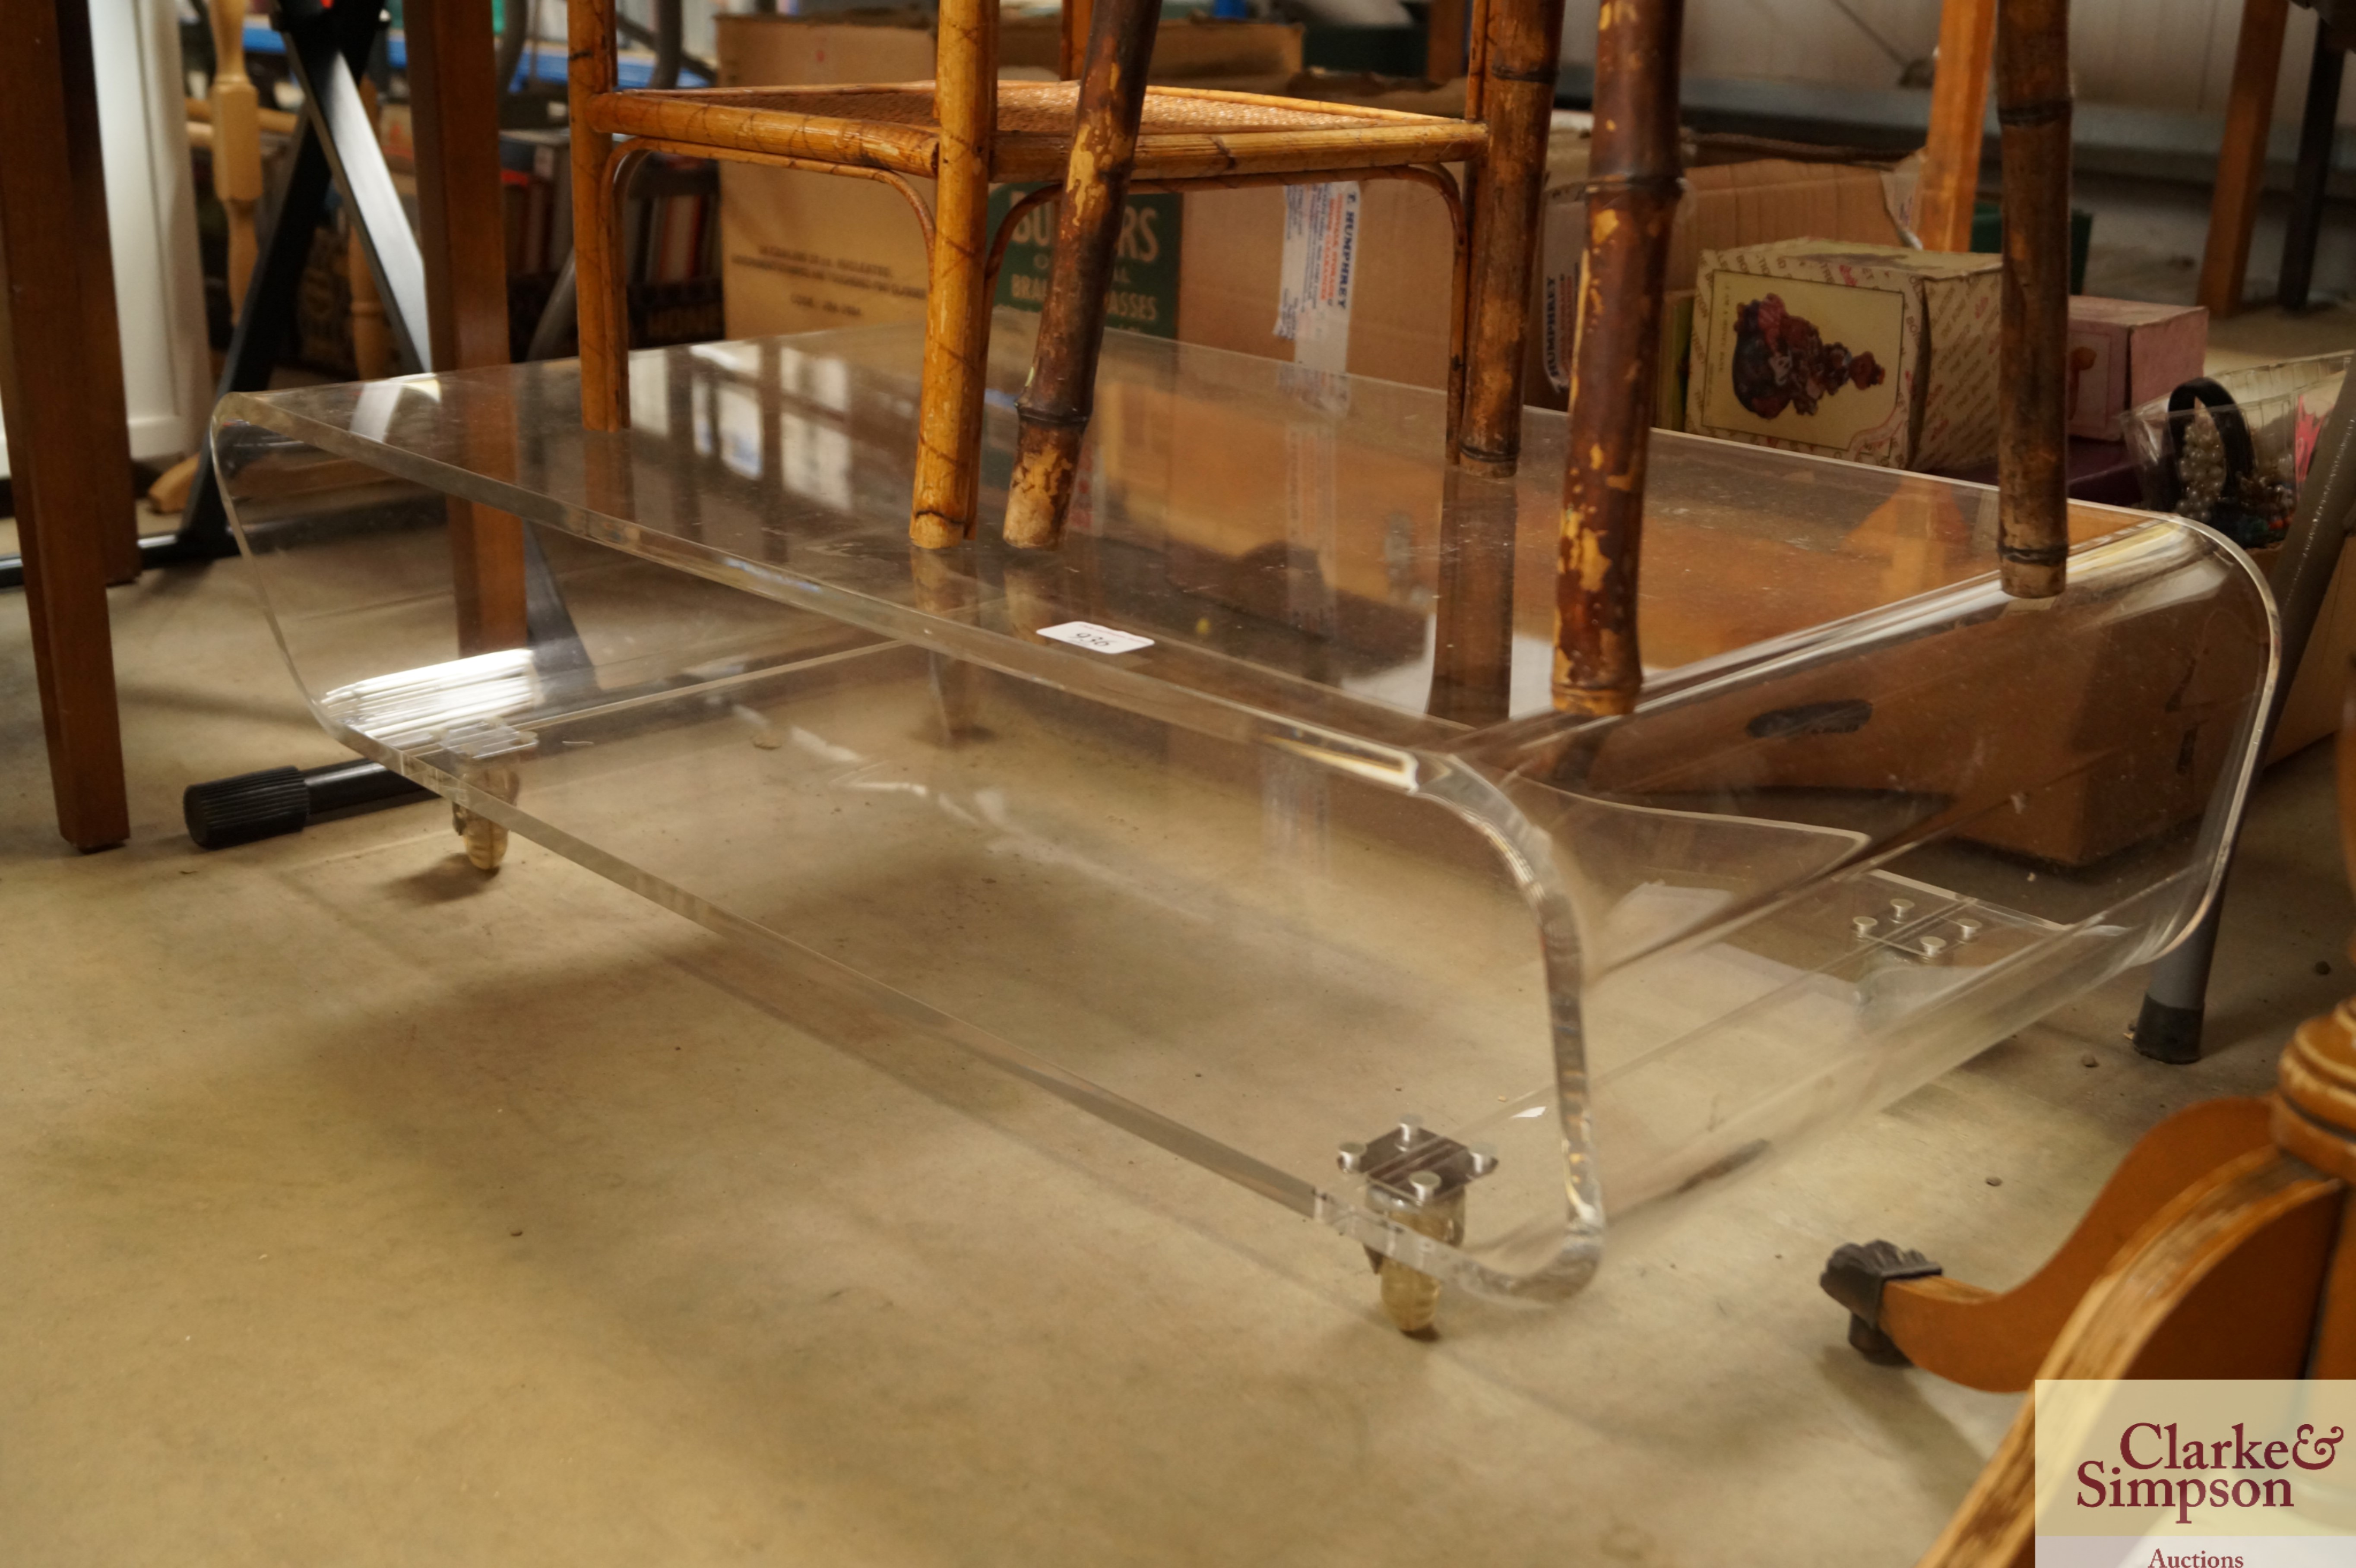 A clear Perspex TV stand